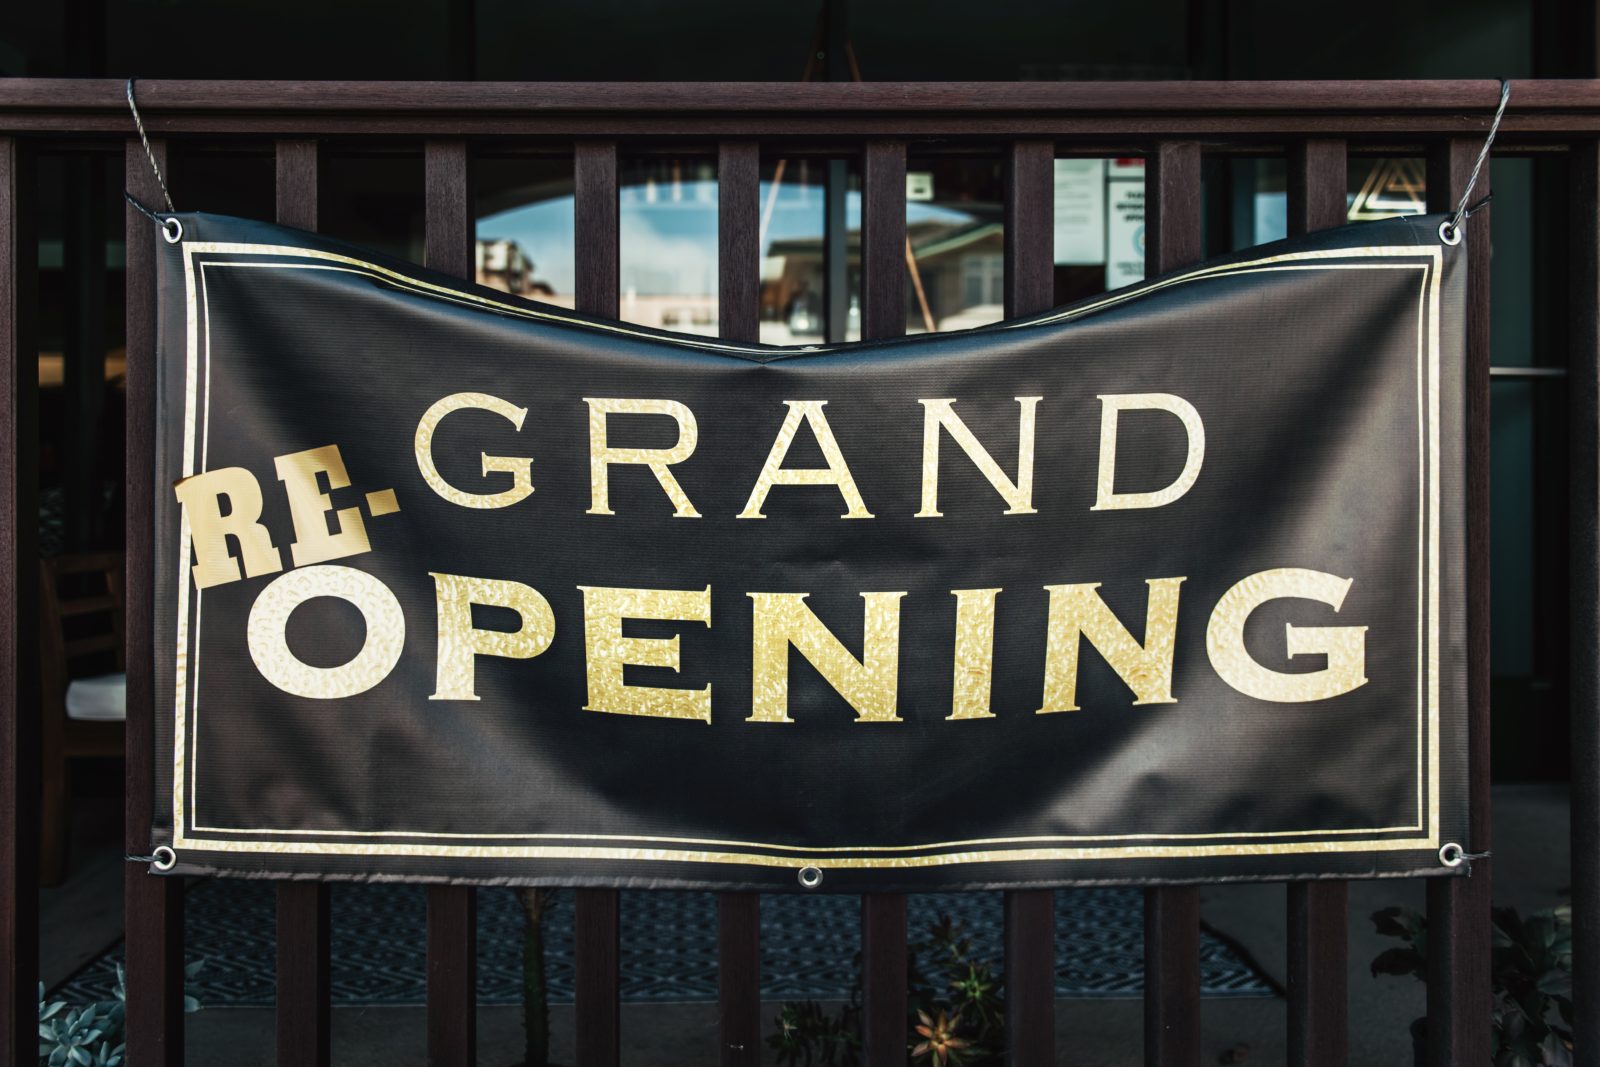 Grand re-opening banner